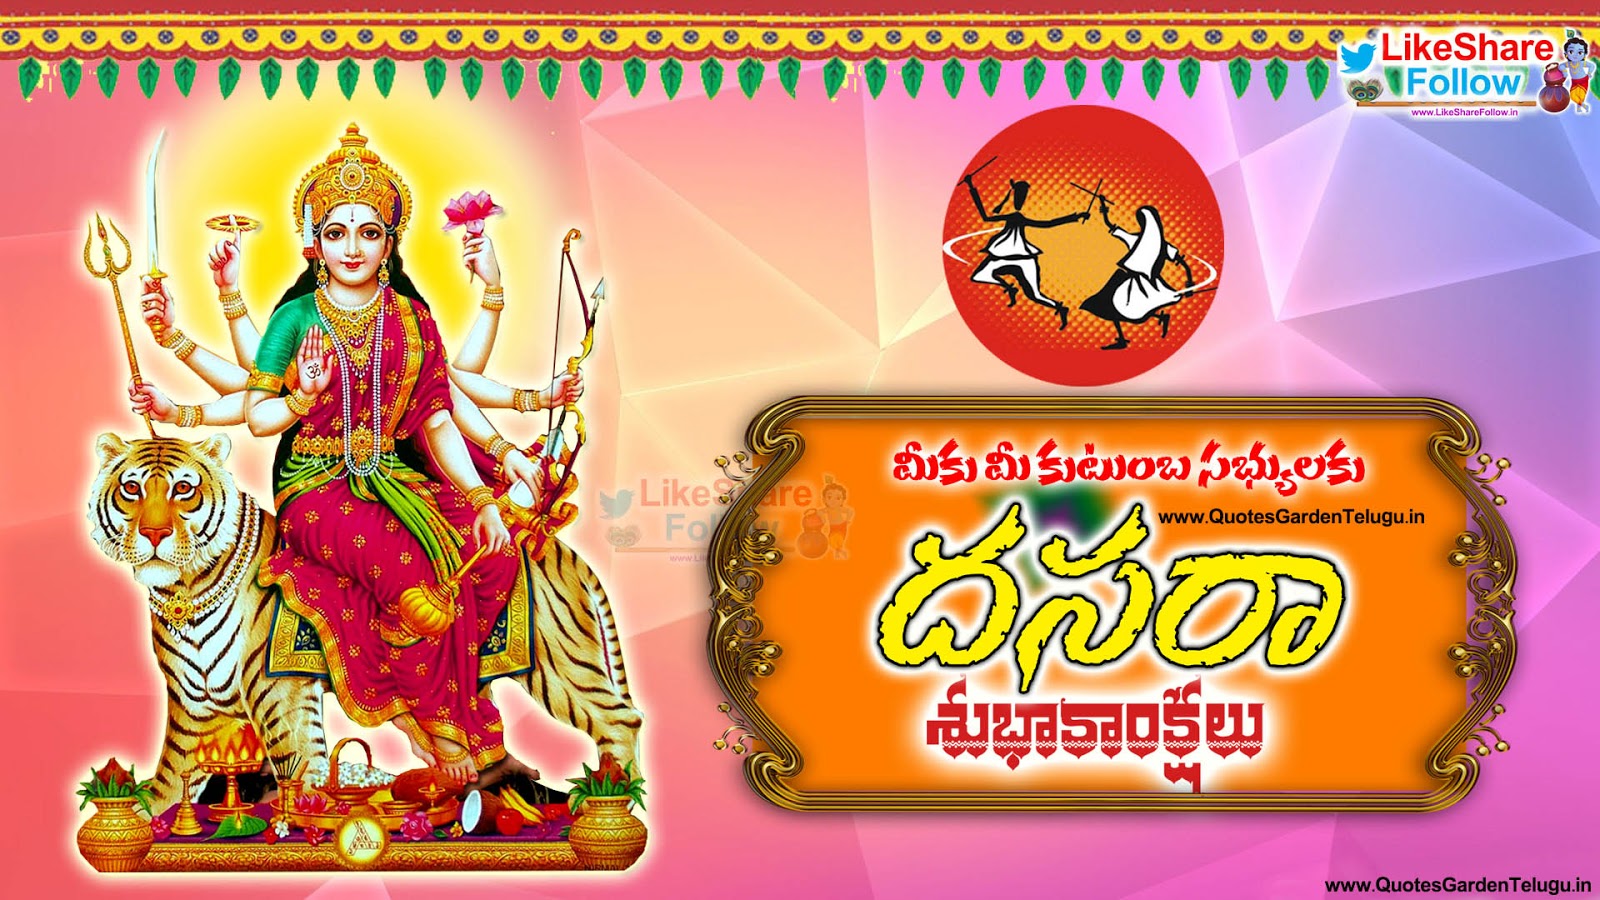 Happy Dussehra 2018 Greetings wishes in Telugu | Like Share Follow